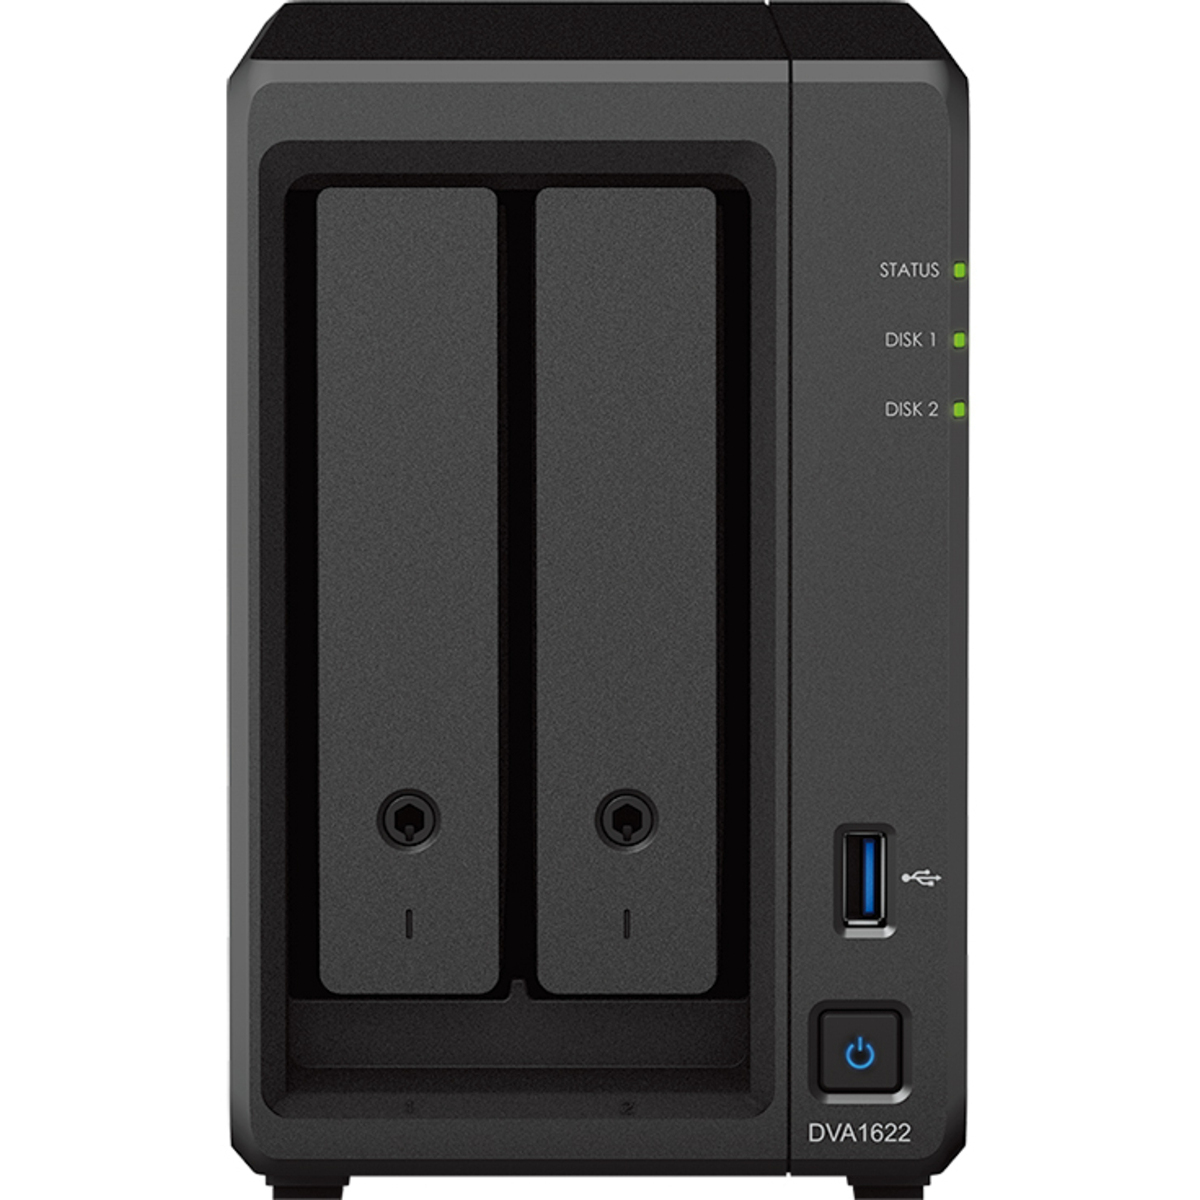 Synology DVA1622 NVR - Network Video Recorder Burn-In Tested Configurations